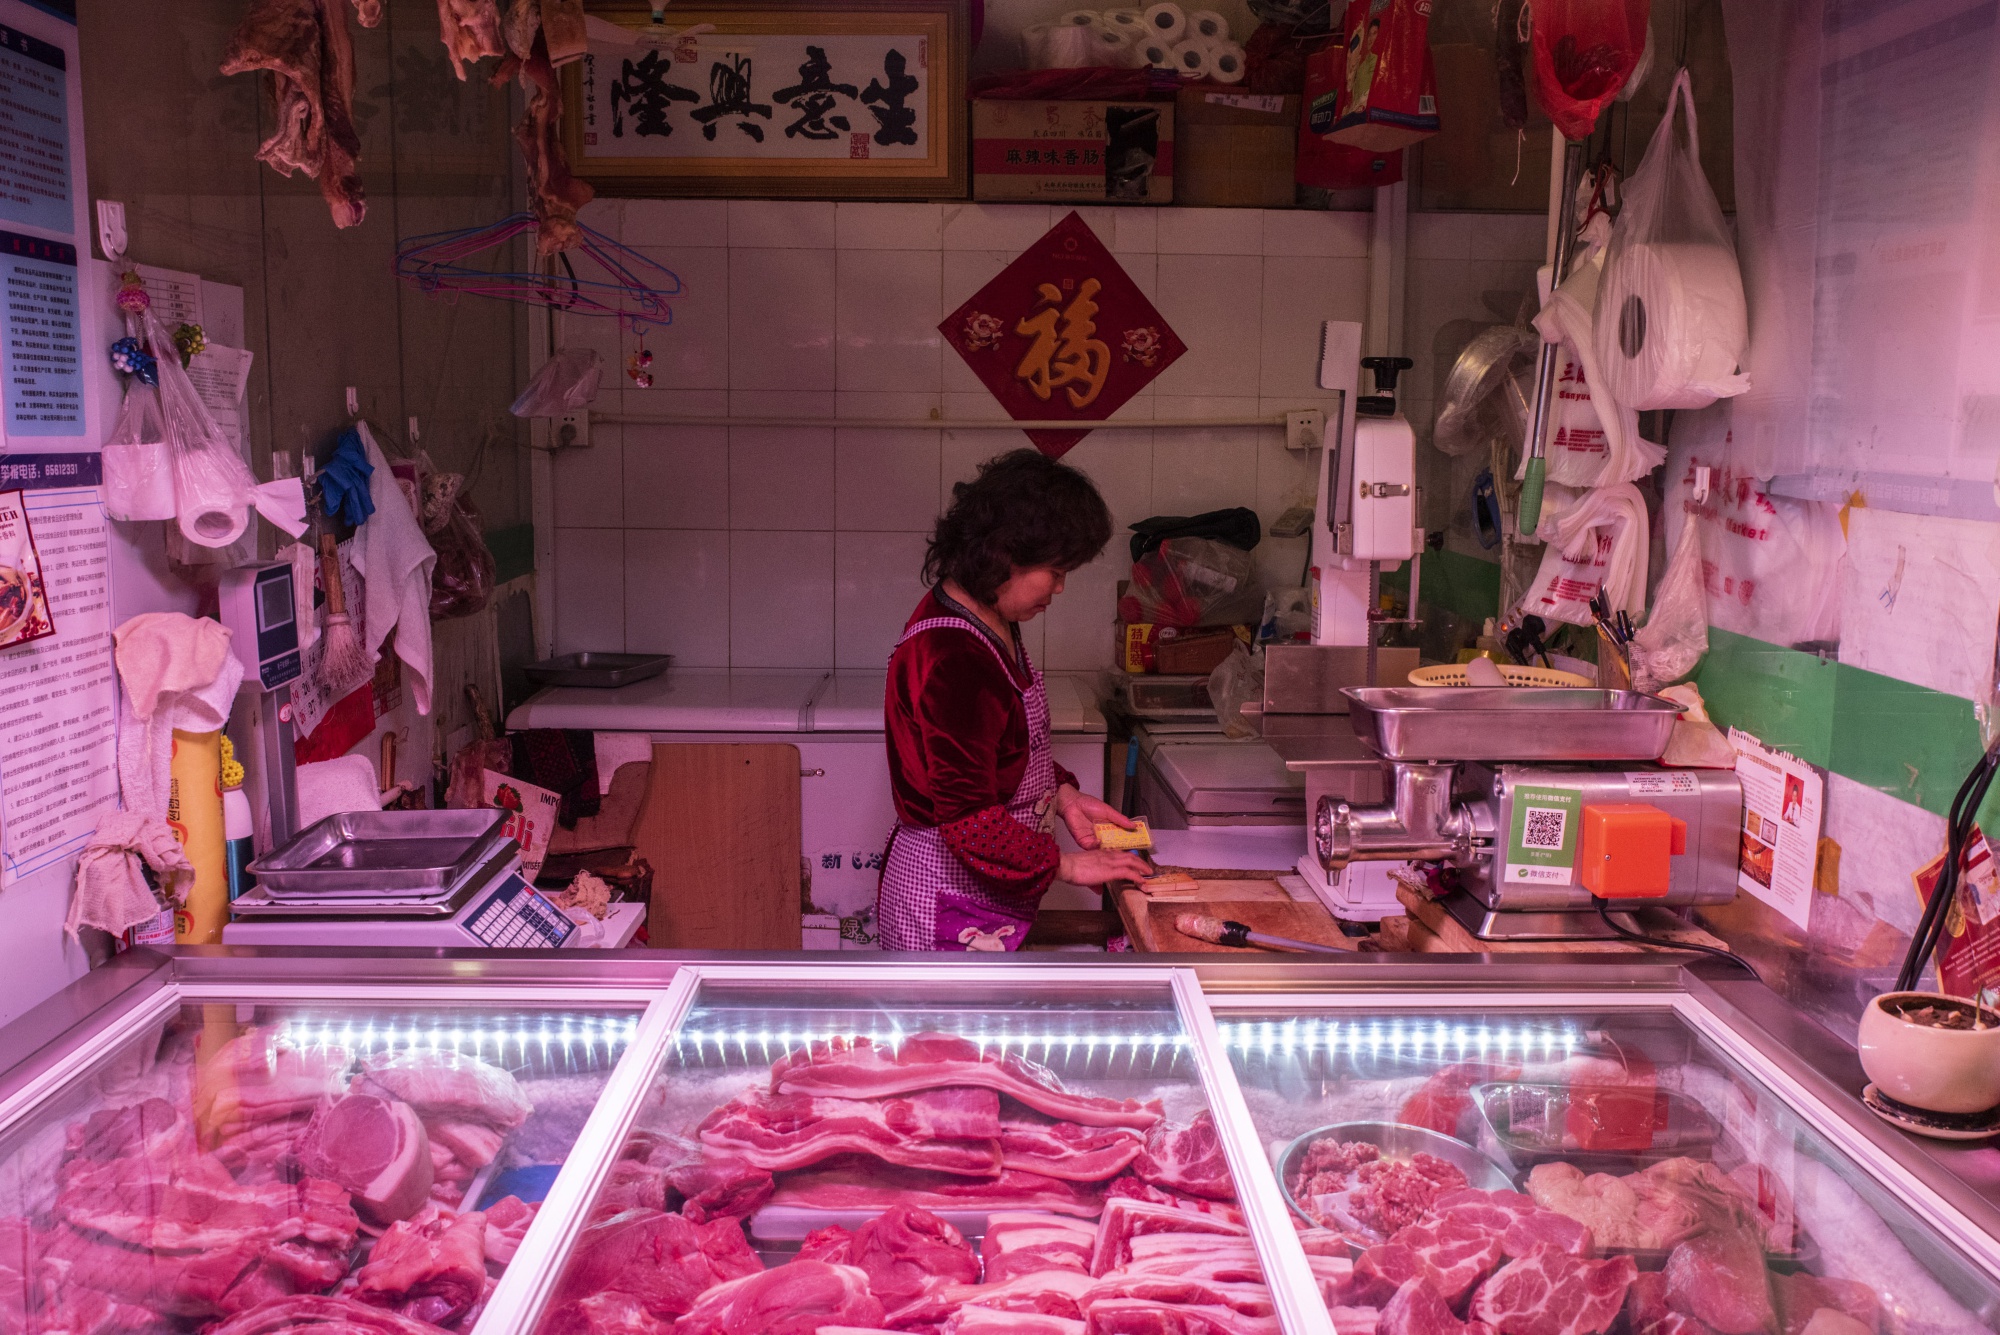 A pork vendor stands behind the counter at a market stall in Beijing.